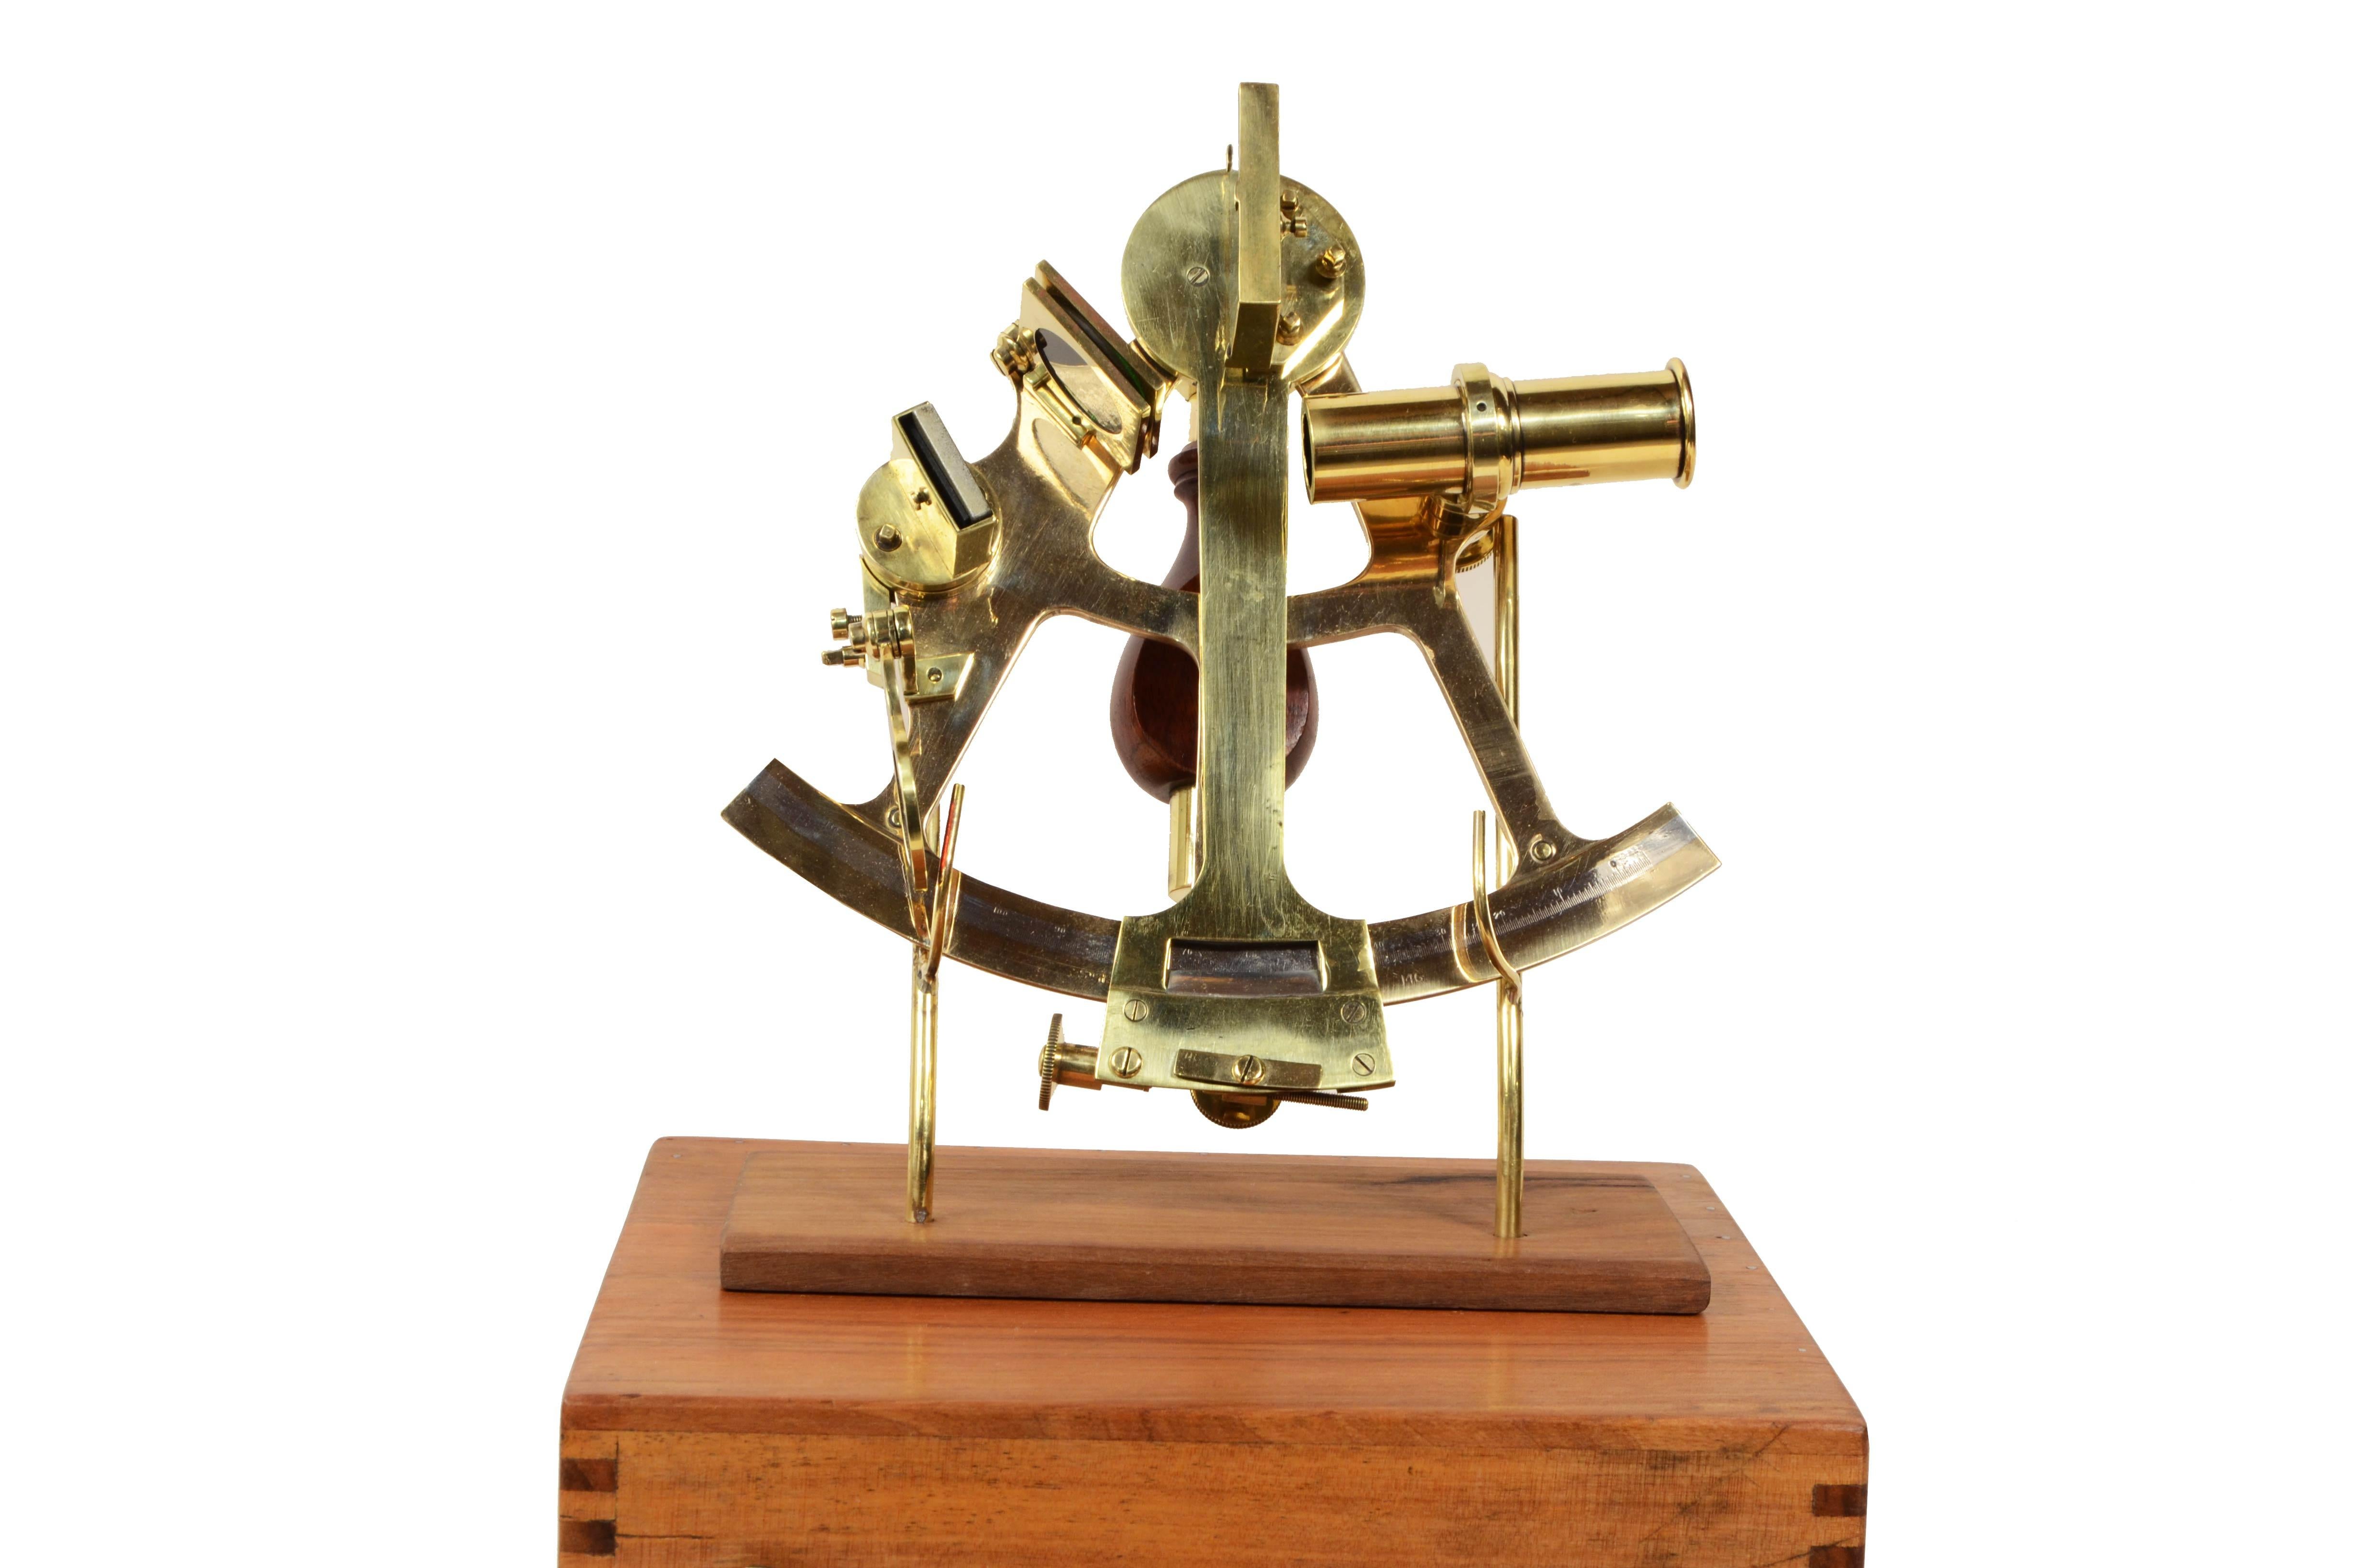 Small brass sextant, signed S.te des Etablissements Gaumont Paris  146,
 datatable around the end  from the 19th century. Instrument complete with optics and housed in a beautiful  original walnut square box with original key, hinges, handle, and